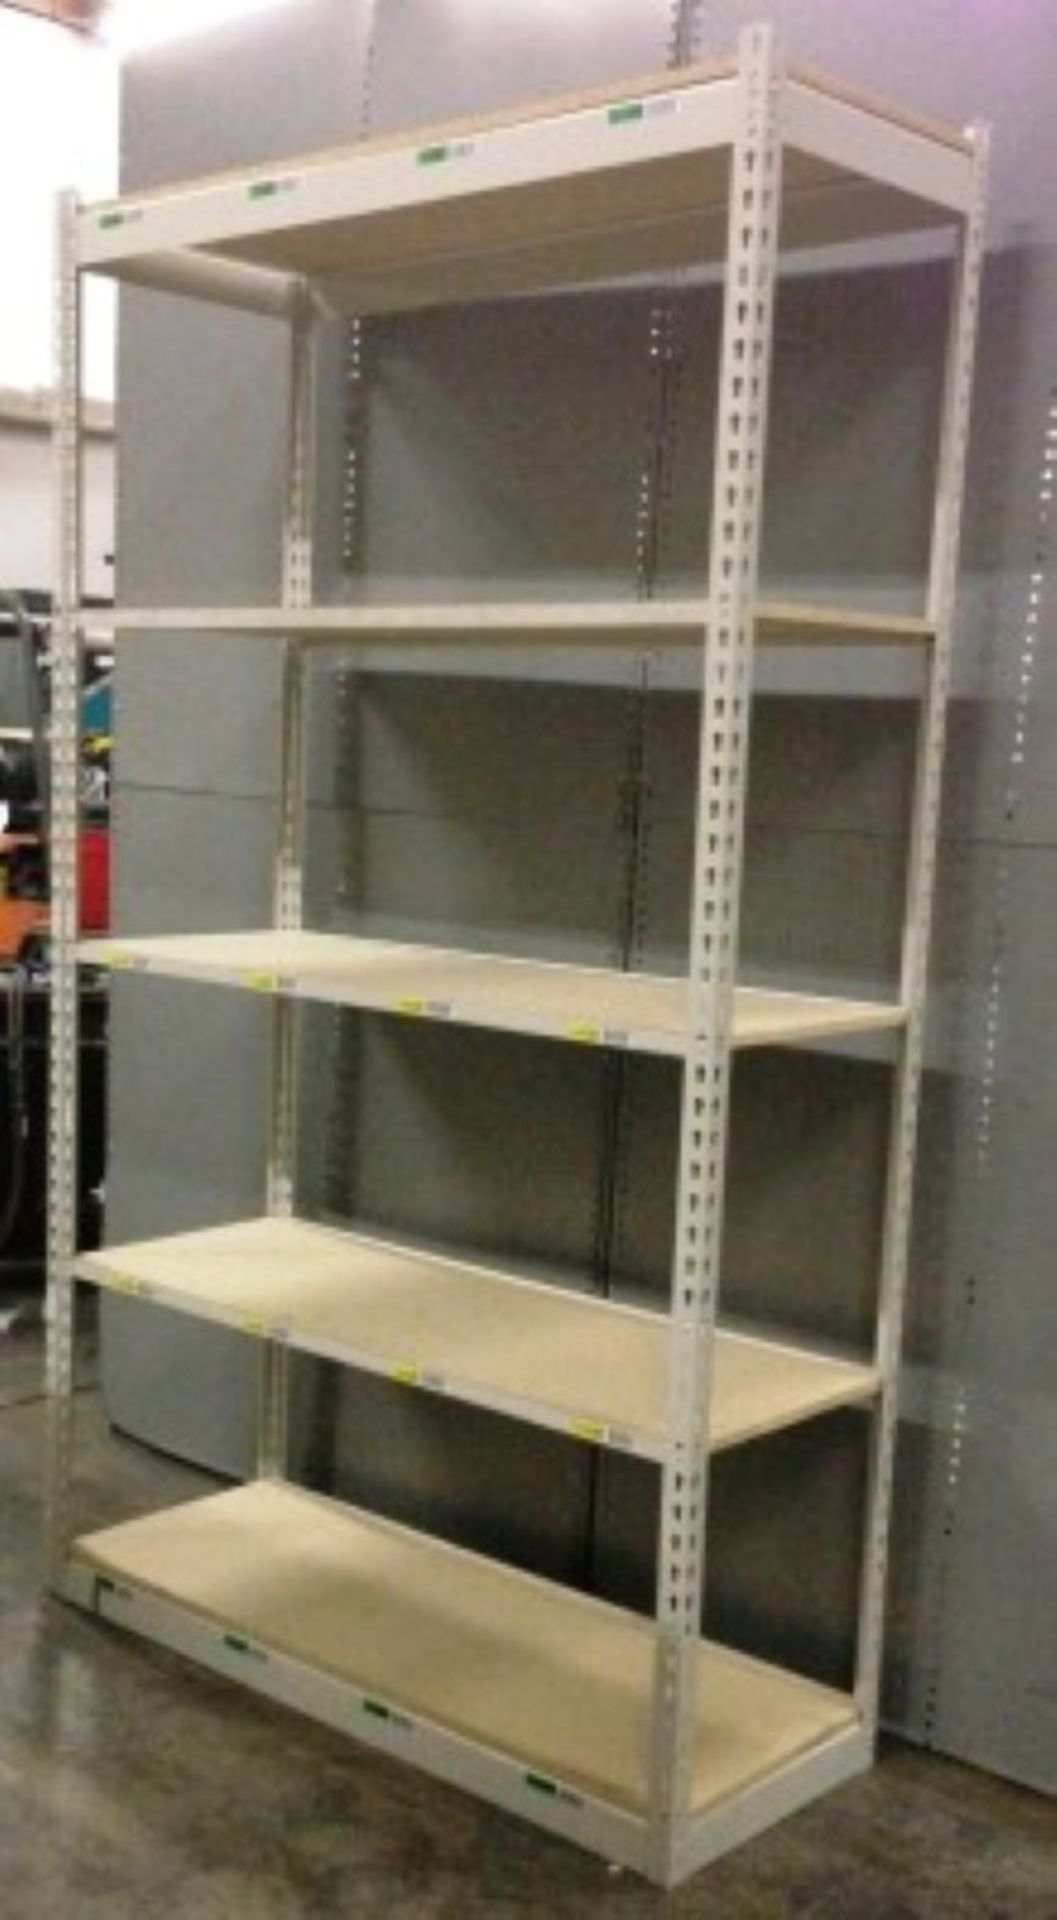 ONE LOT OF 10 SECTIONS OF RIVETIER INDUSTRIAL SHELVING,  EACH SIZE 18"D X 48"W X 84"H, COLOR: - Image 4 of 4